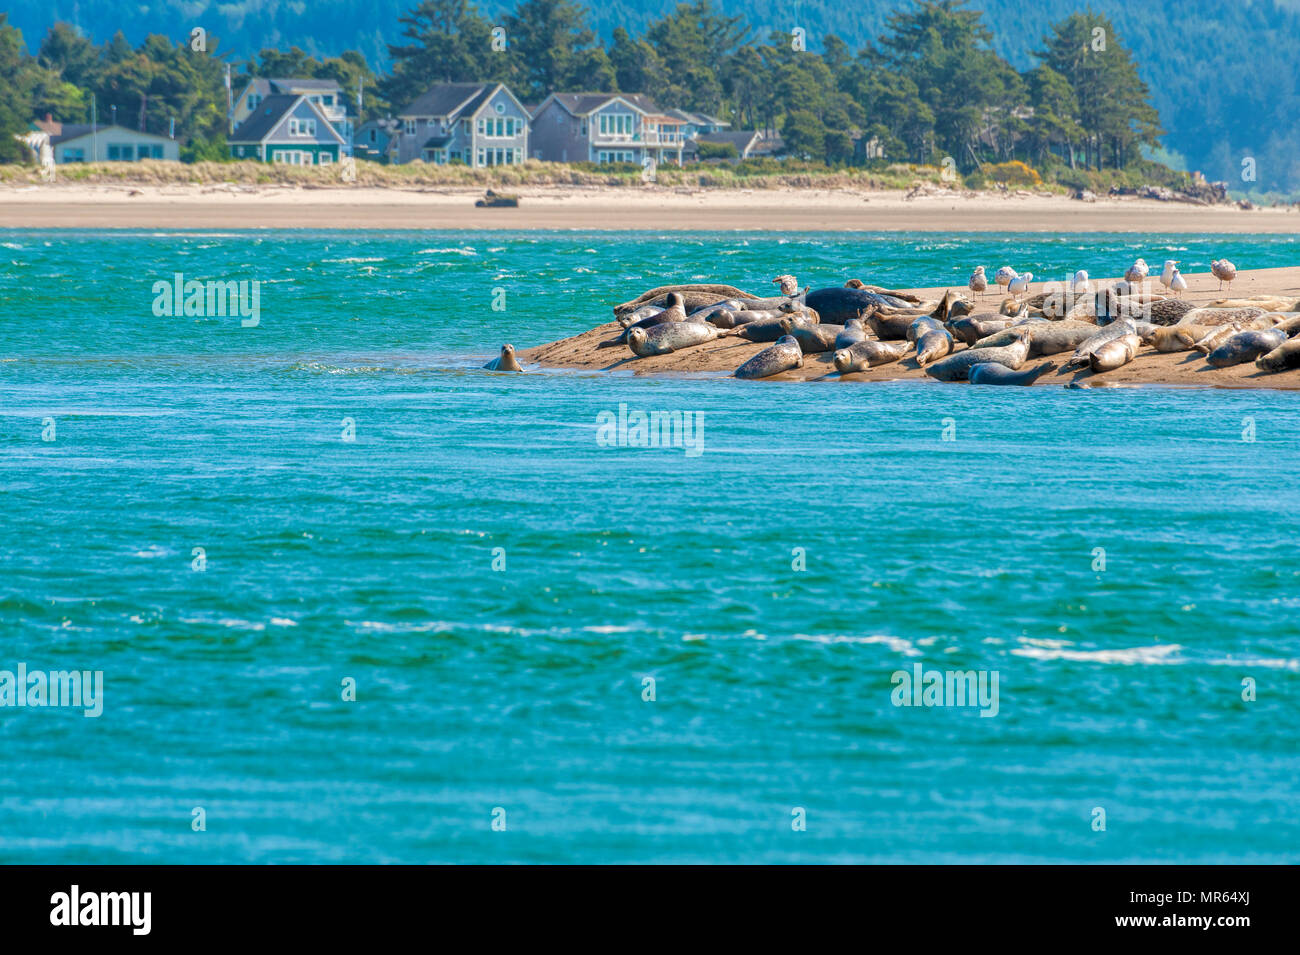 Seals sunbath on a sand bar in Lincoln City.  Homes line the beach in the background Stock Photo